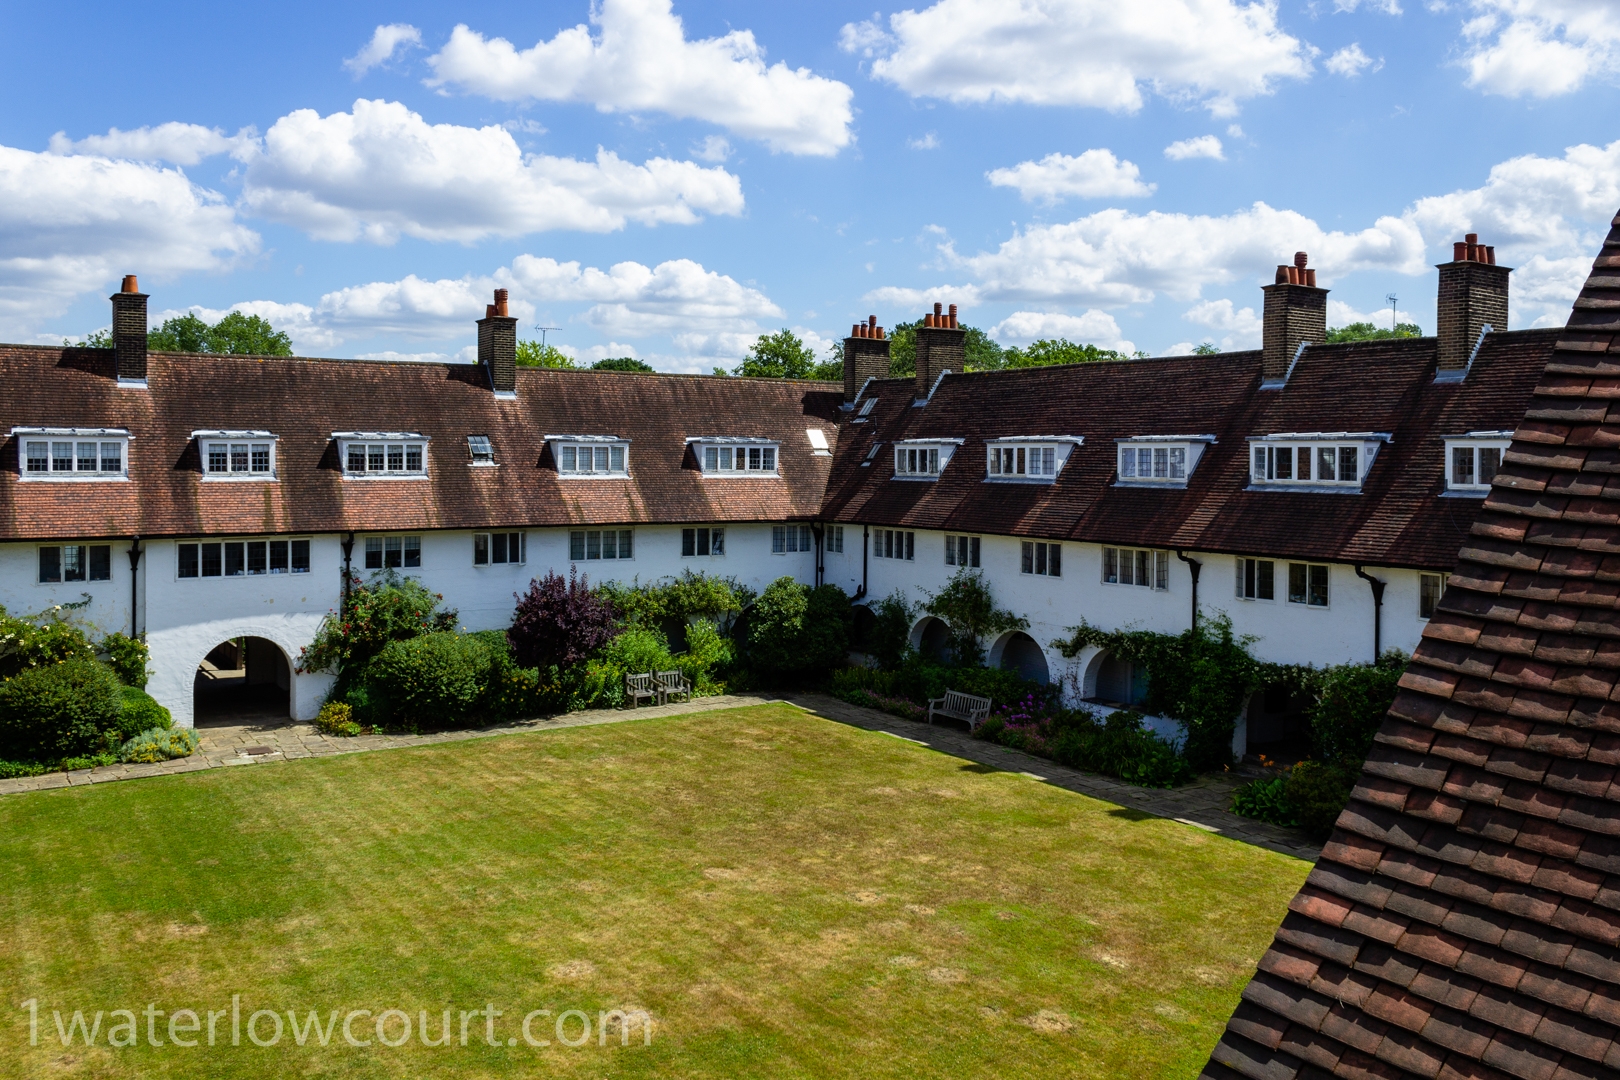 A bird’s eye view of the central garden and cloisters of Waterlow Court. Waterlow Court is an Arts & Crafts Grade II* listed building, designed by M. H. Baillie Scott, 1909, and located in Hampstead Garden Suburb, London NW11 7DT. Flat 1, a one-bedroom, ground-floor flat, is for sale. Listed on Rightmove and Zoopla.